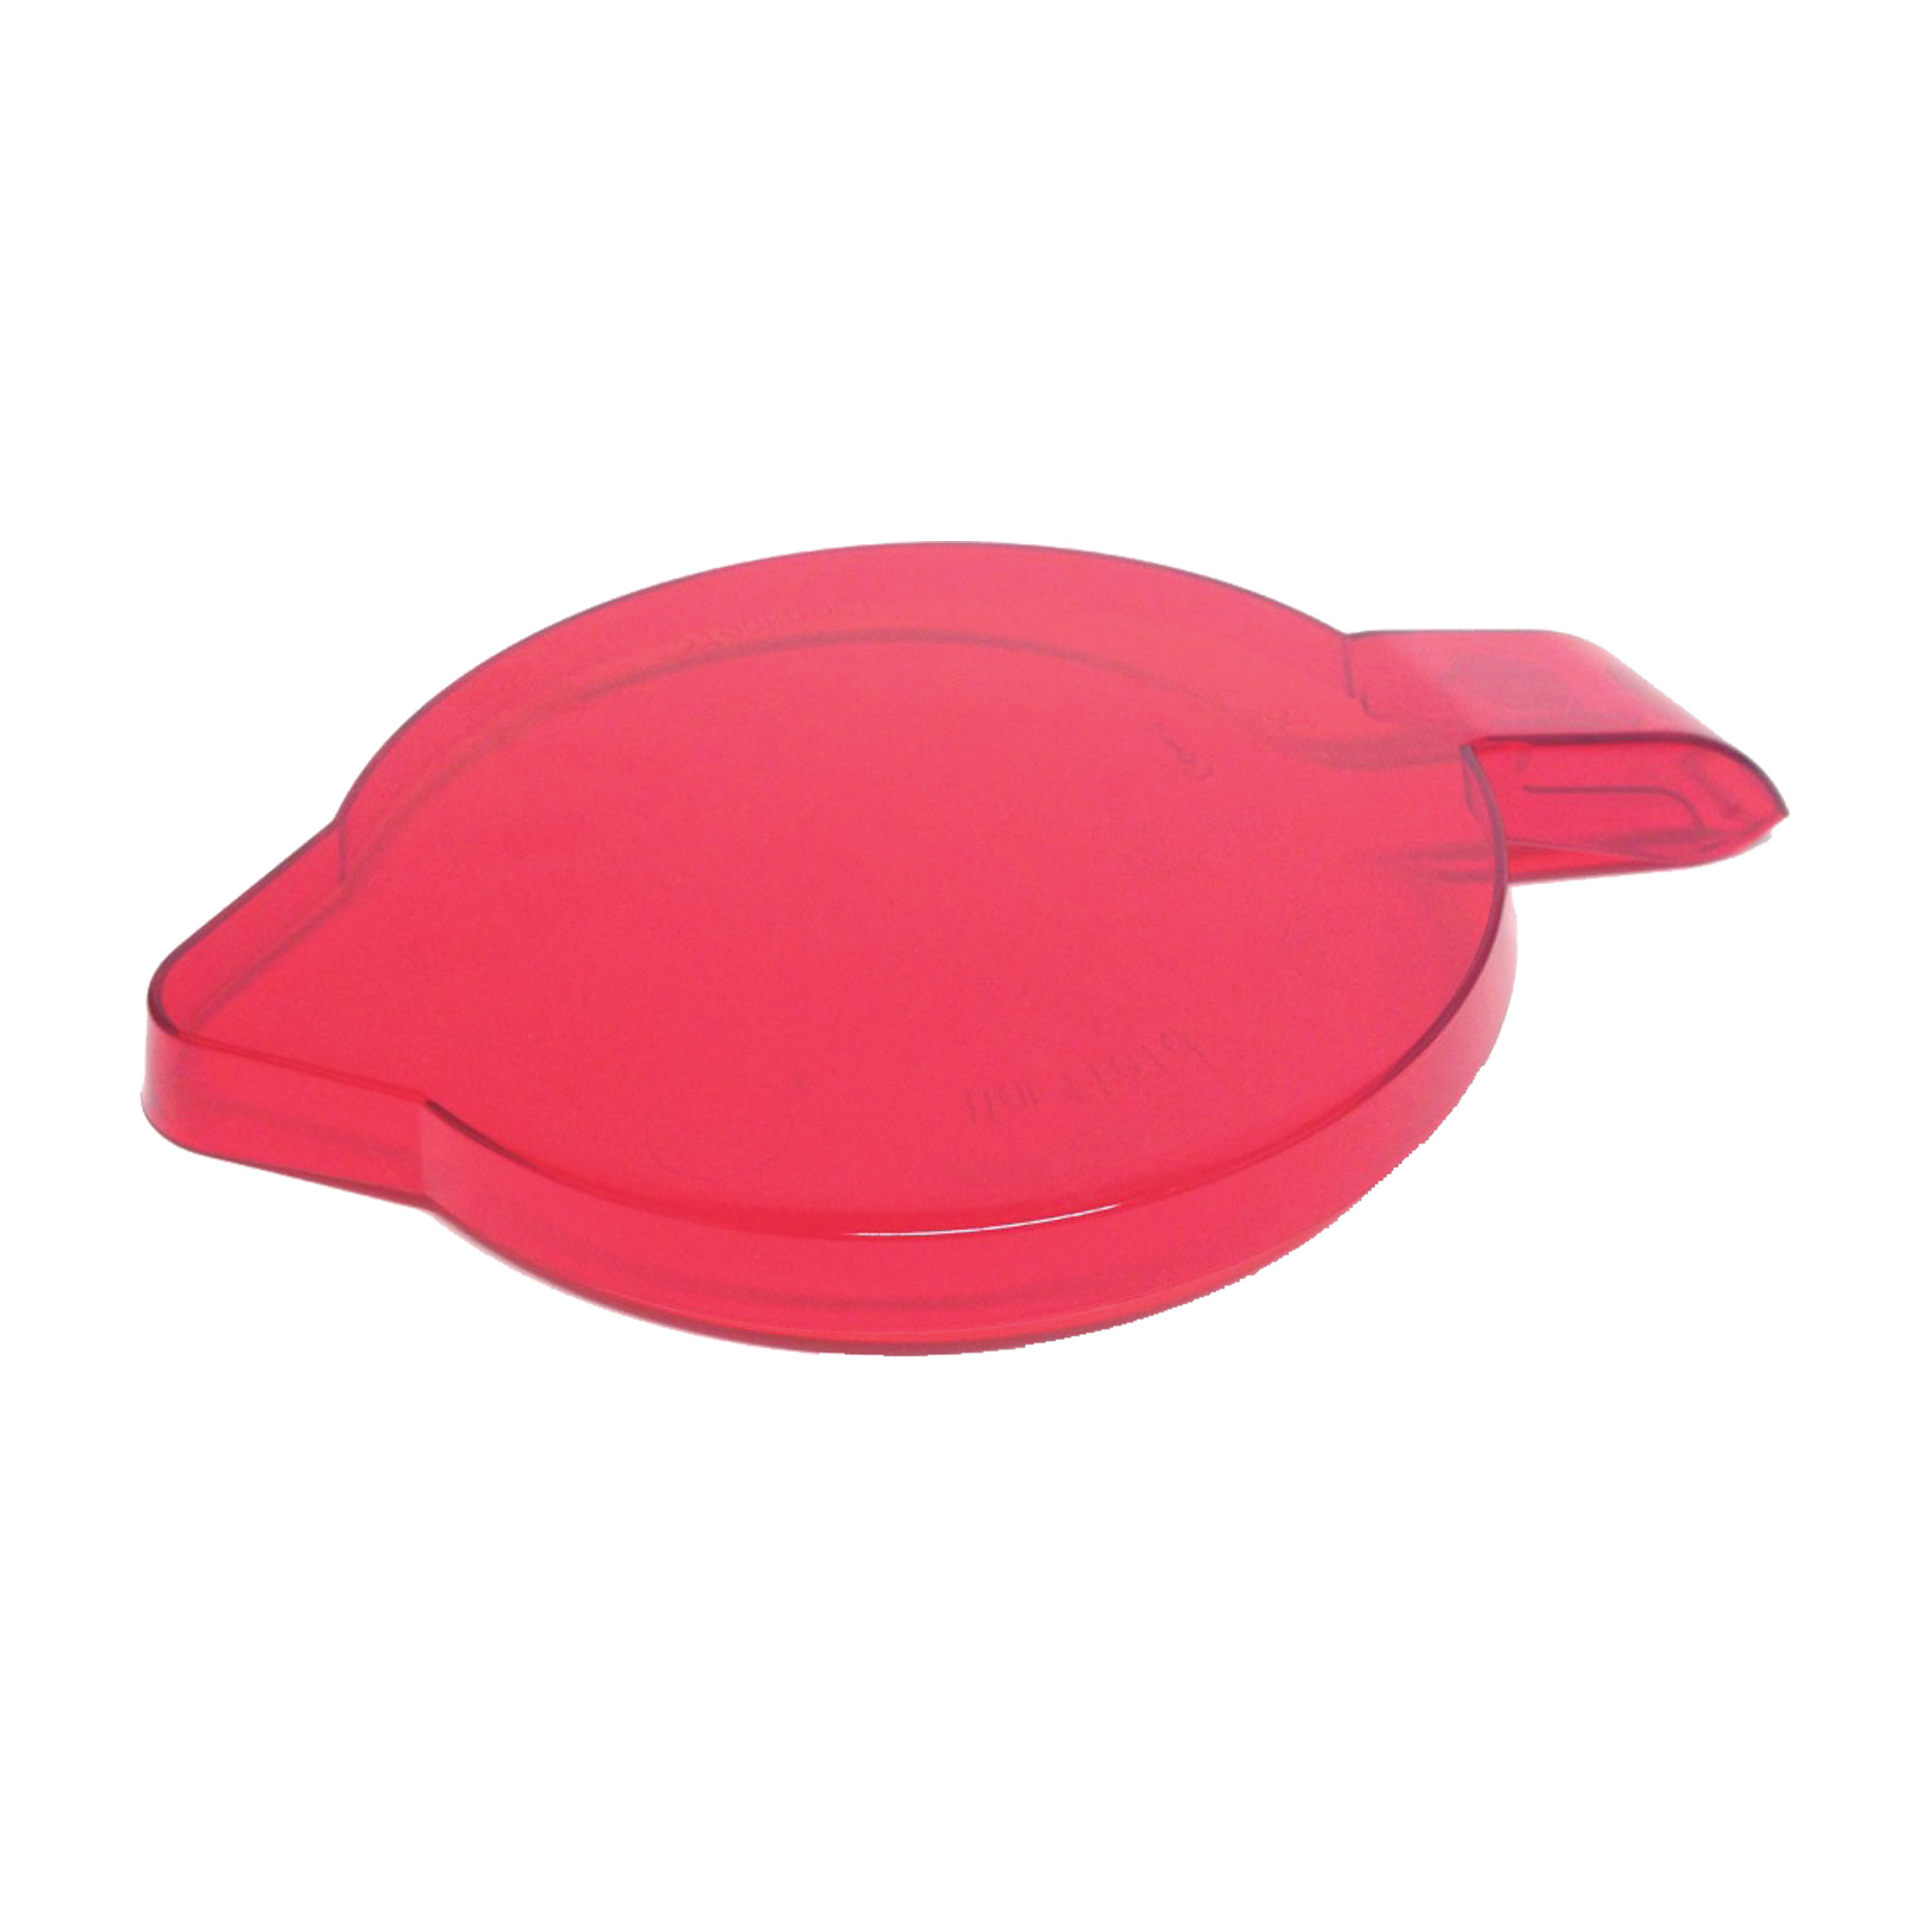 750ml Jug Lid Copolyester (to fit CB-8064) RED - EACH